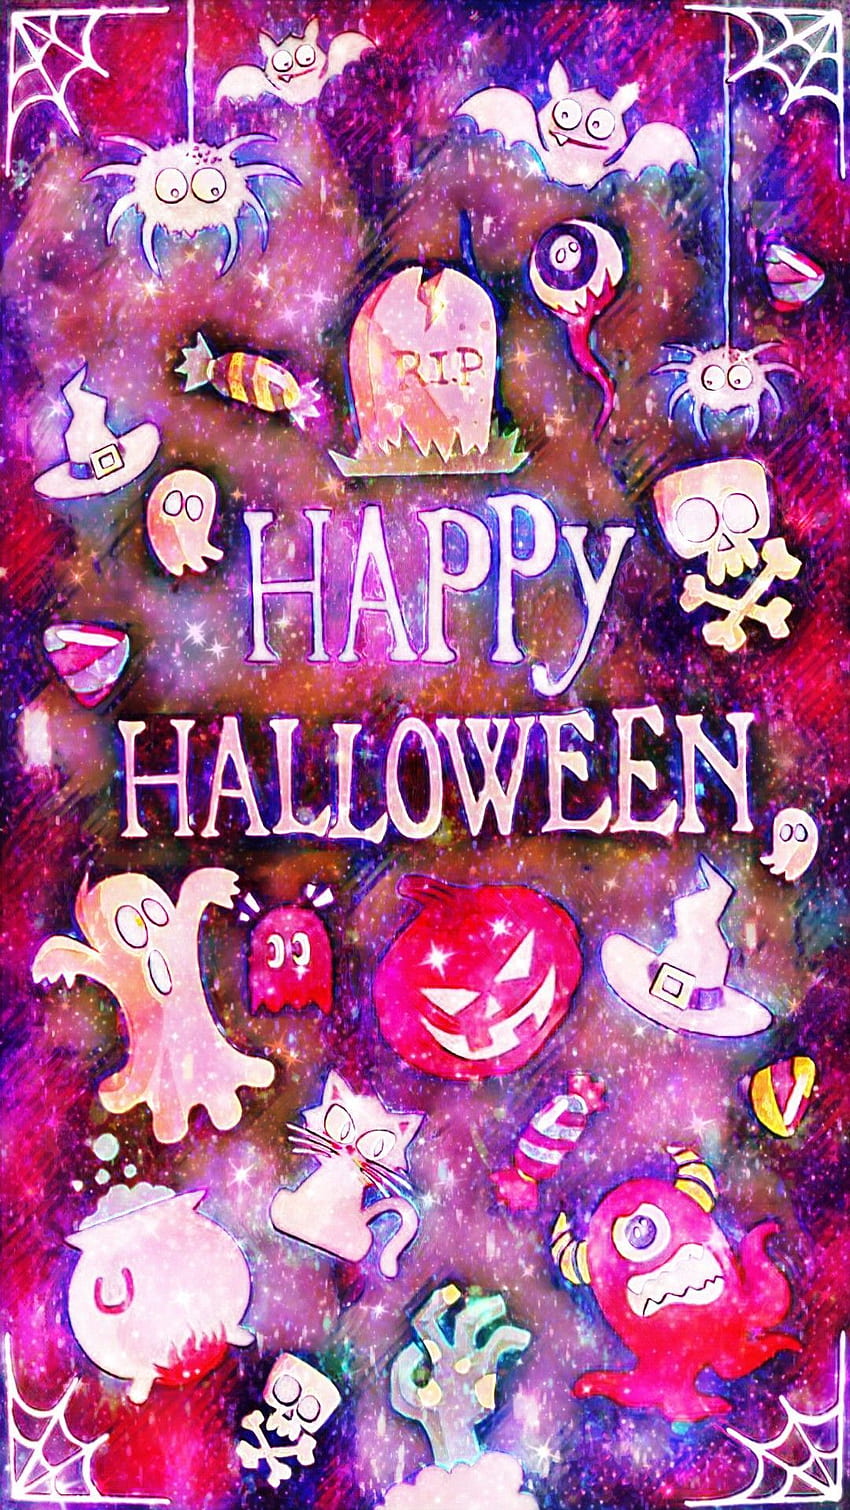 Happy Halloween Galaxy, made by me HD phone wallpaper